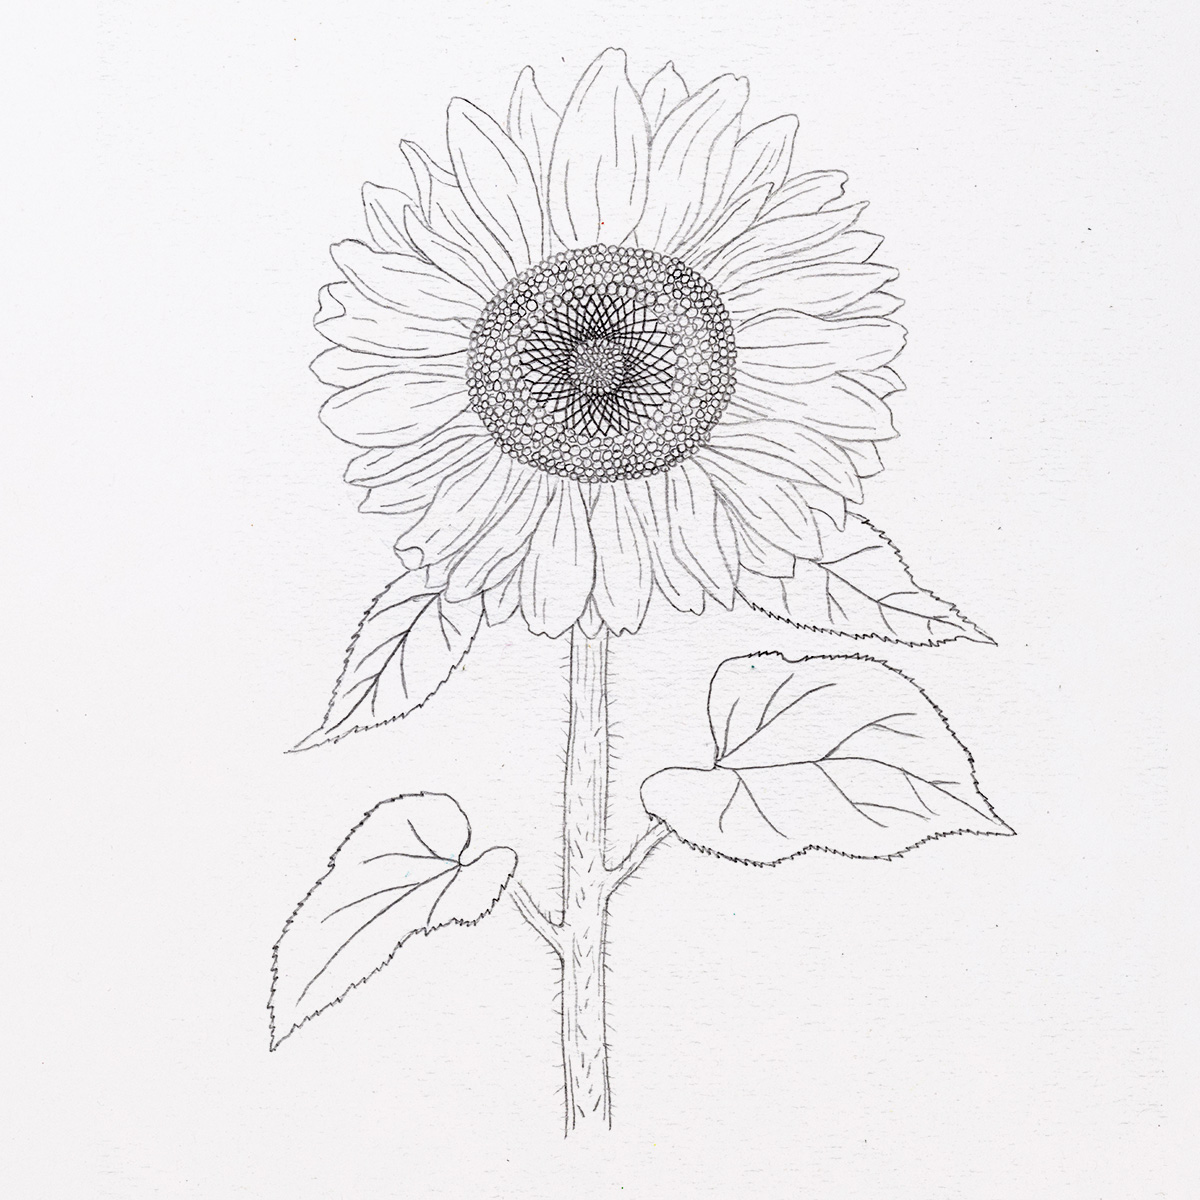 Sunflower Drawing || How To Draw Sunflower Step By Step || Easy Sunflower  Drawing.. - YouTube